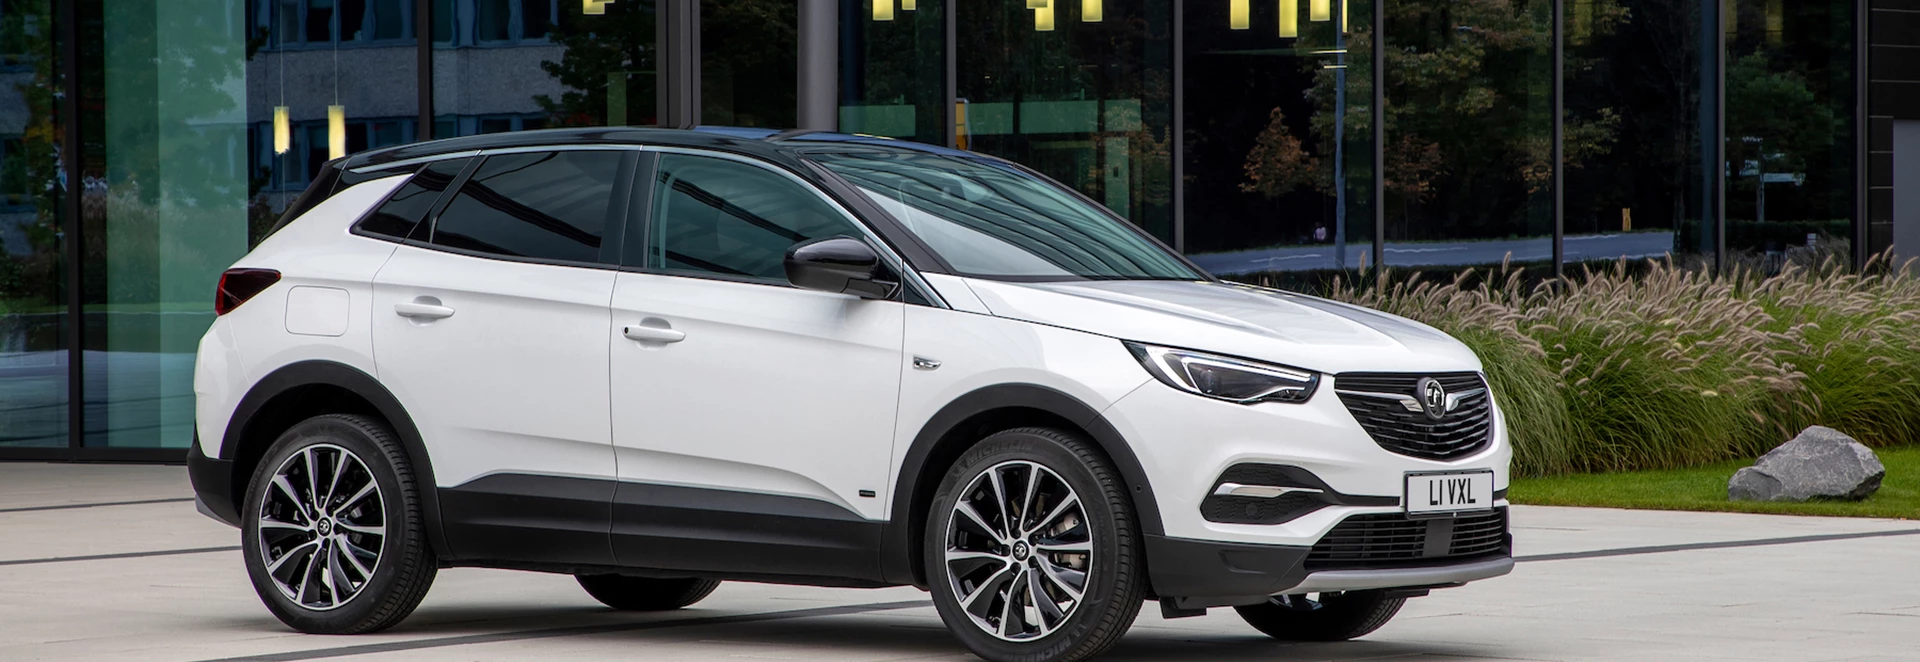 New front-wheel-drive plug-in hybrid joins Vauxhall Grandland X line-up